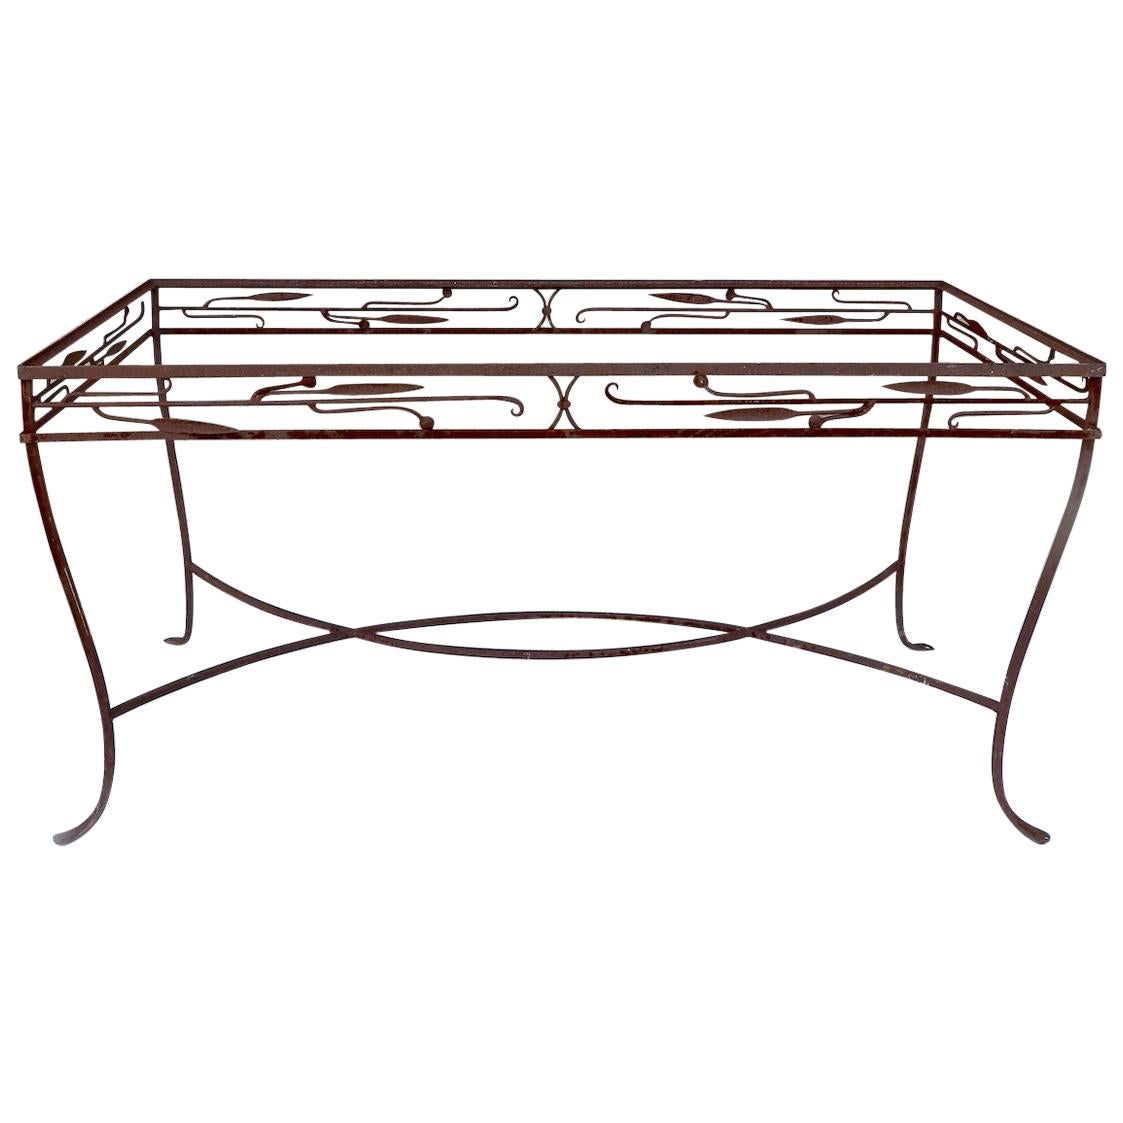 Large Wrought Iron Art Deco Table Attributed to Salterini